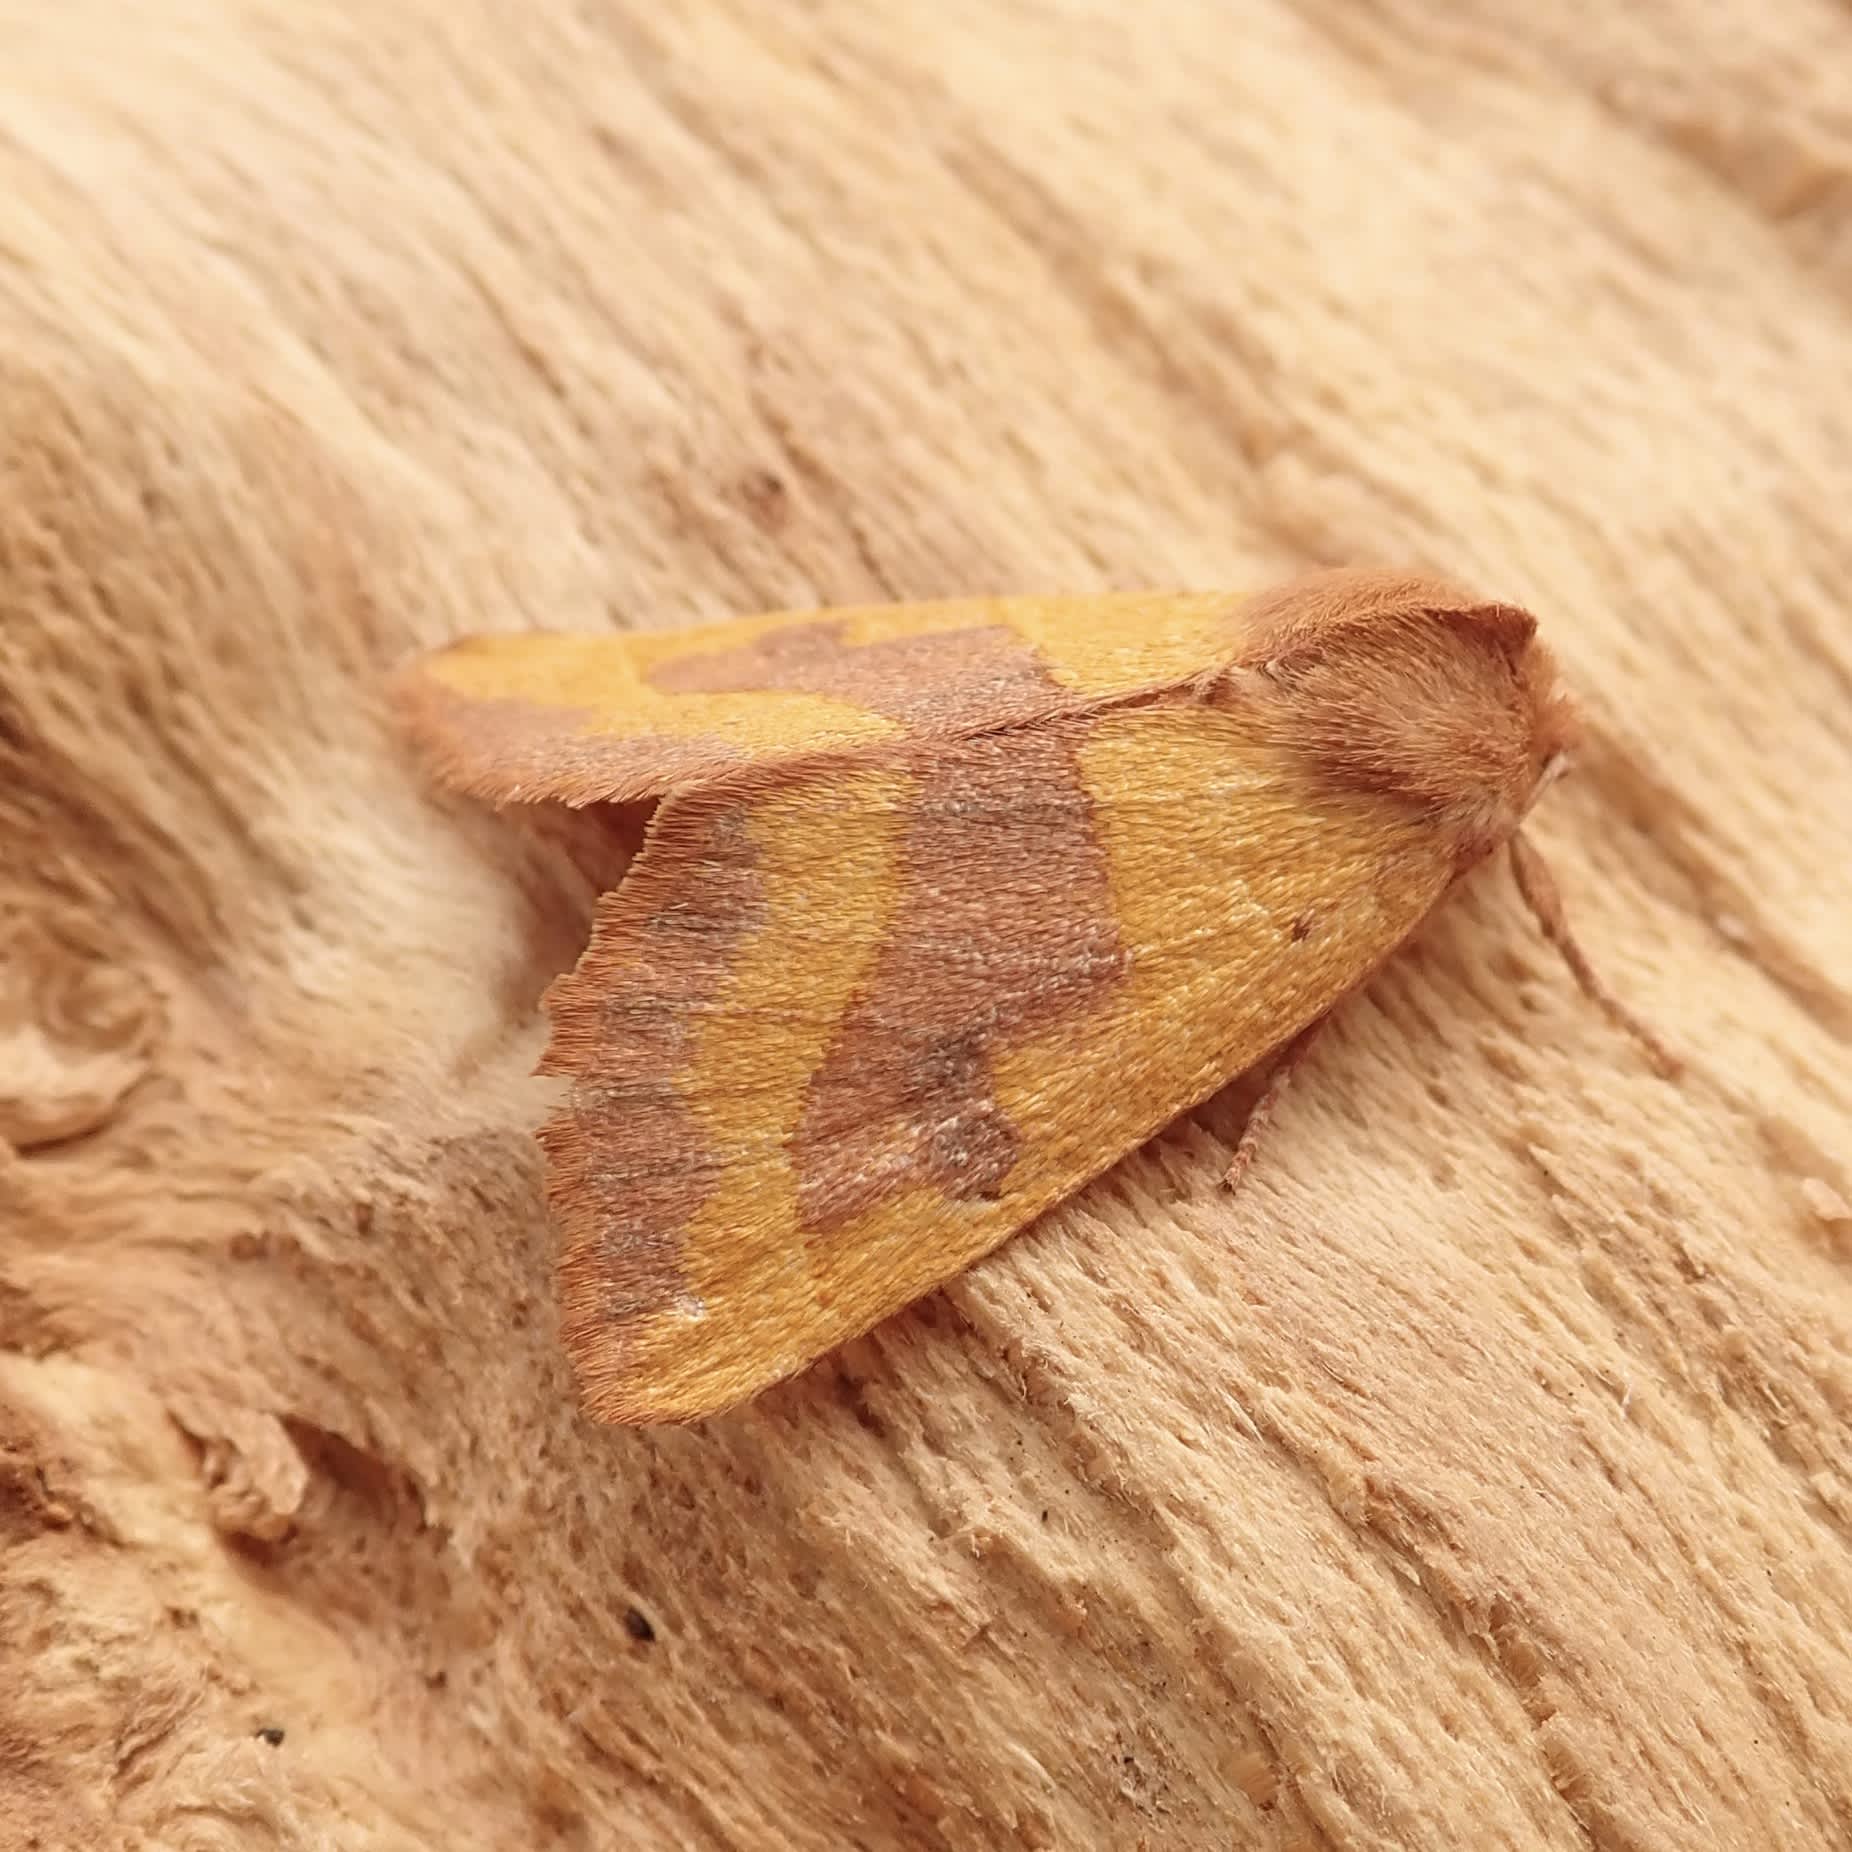 Centre-barred Sallow (Atethmia centrago) photographed in Somerset by Sue Davies 